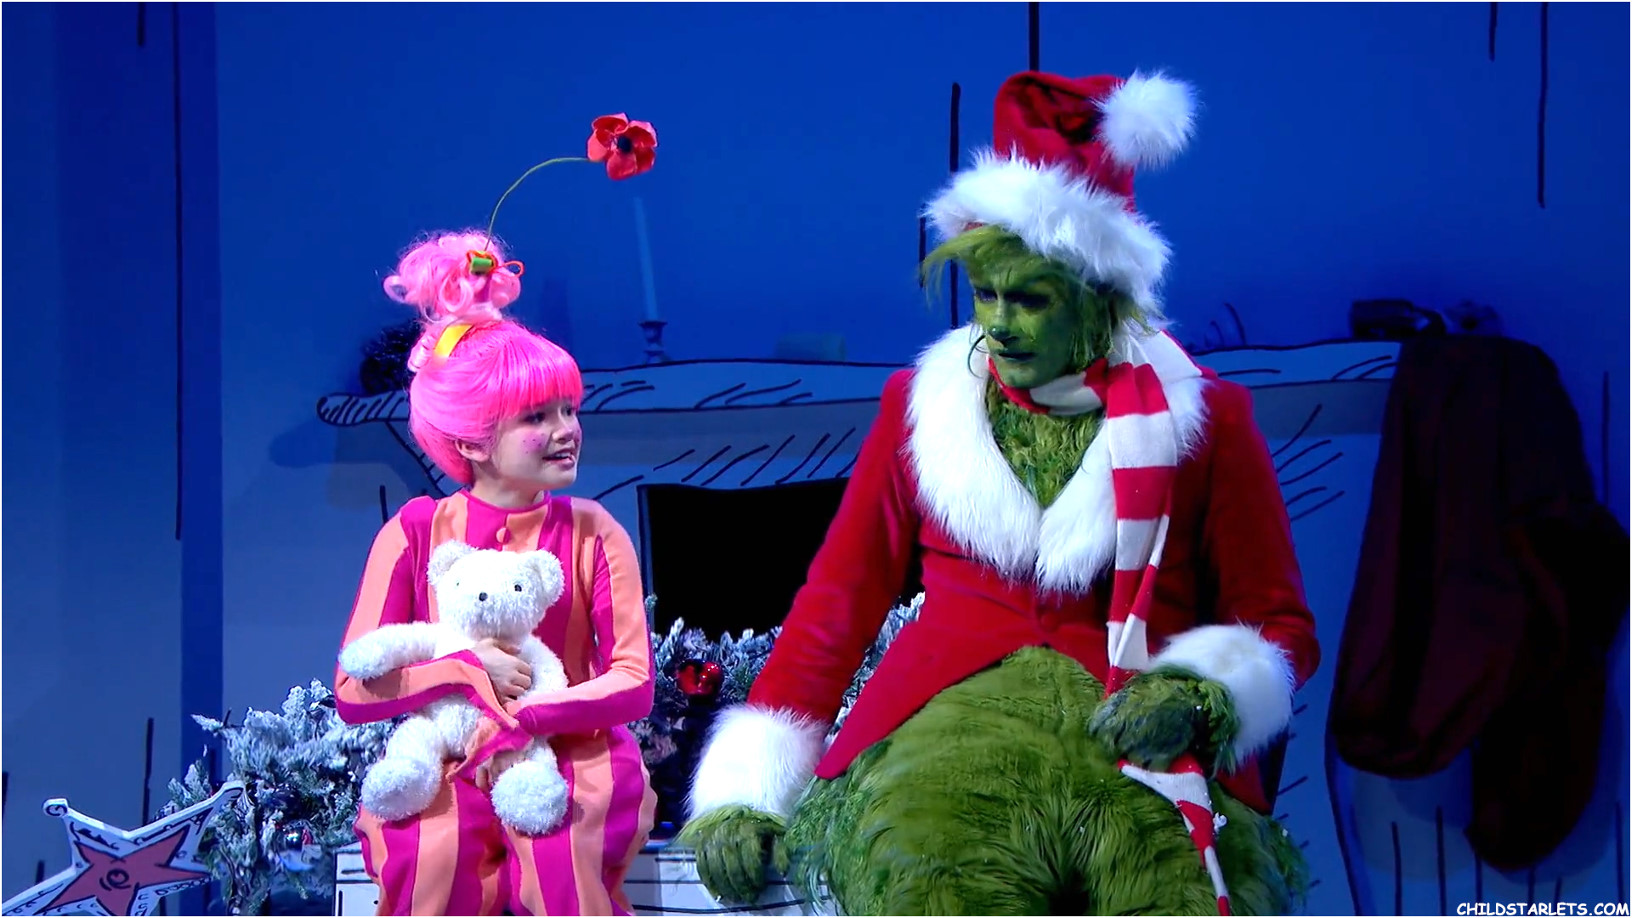 Amelia Minto
"The Grinch Musical" - 2020/HD